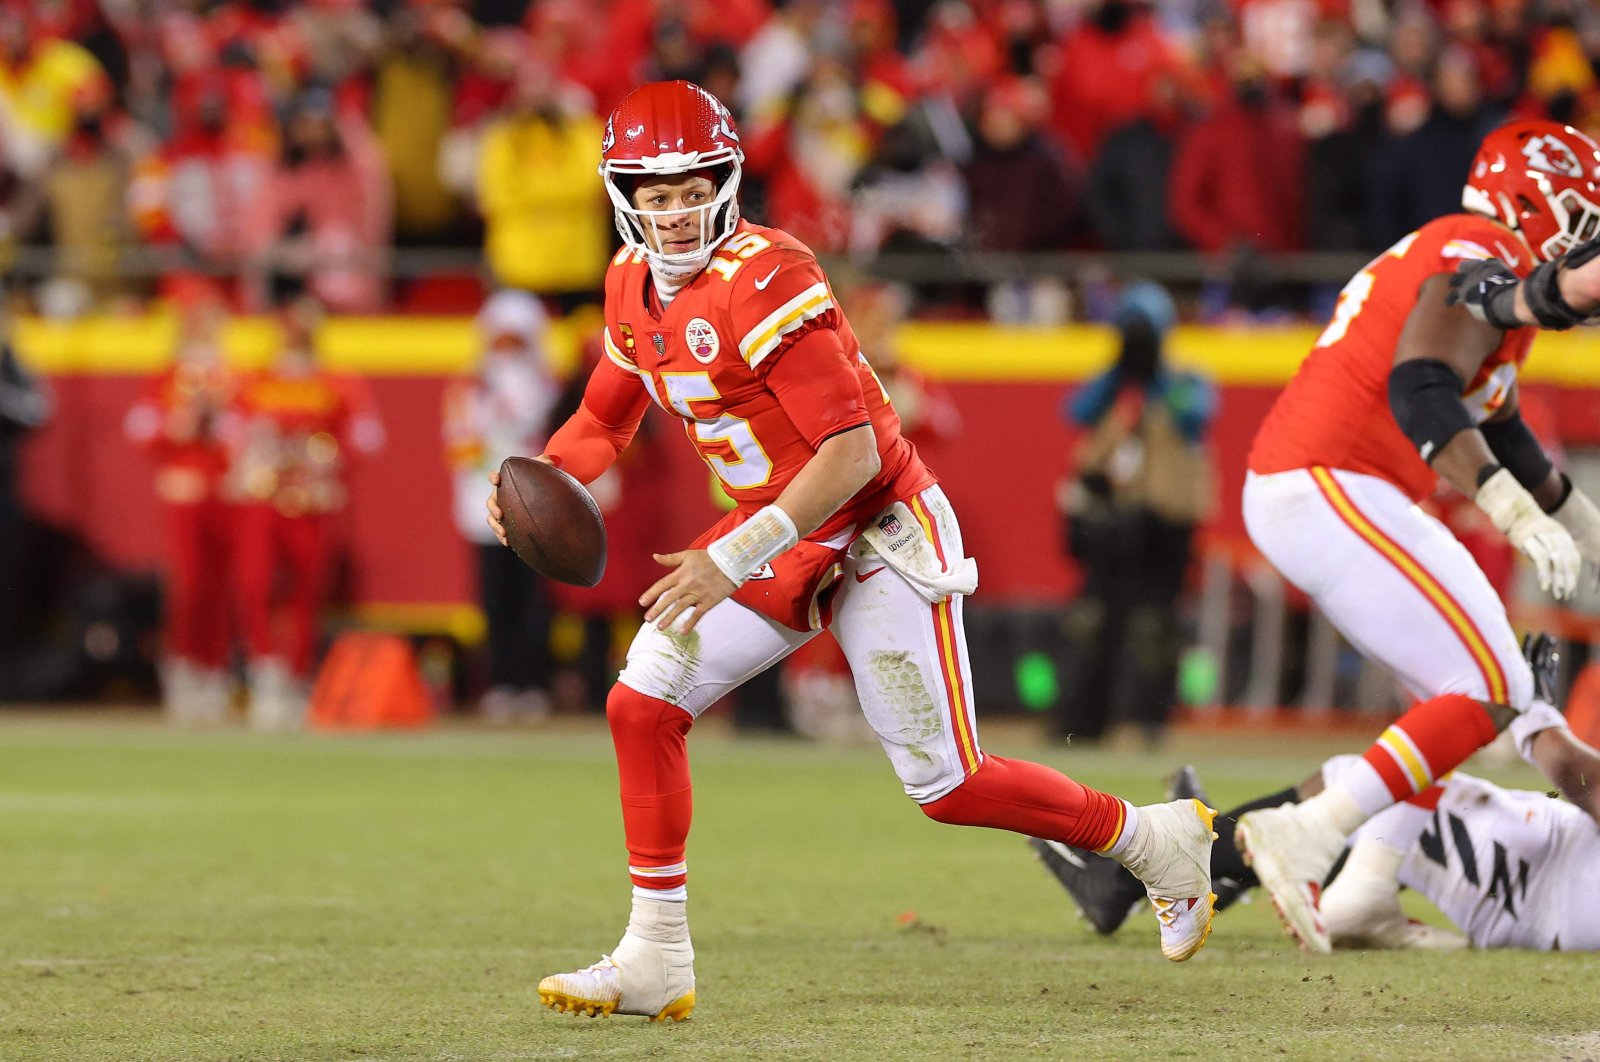 Kansas City Chiefs&#039; Patrick Mahomes looks to pass against the Cincinnati Bengals during the fourth quarter in the AFC Championship Game at GEHA Field at Arrowhead Stadium, Kansas City, U.S., Jan. 29, 2023. (AFP Photo)